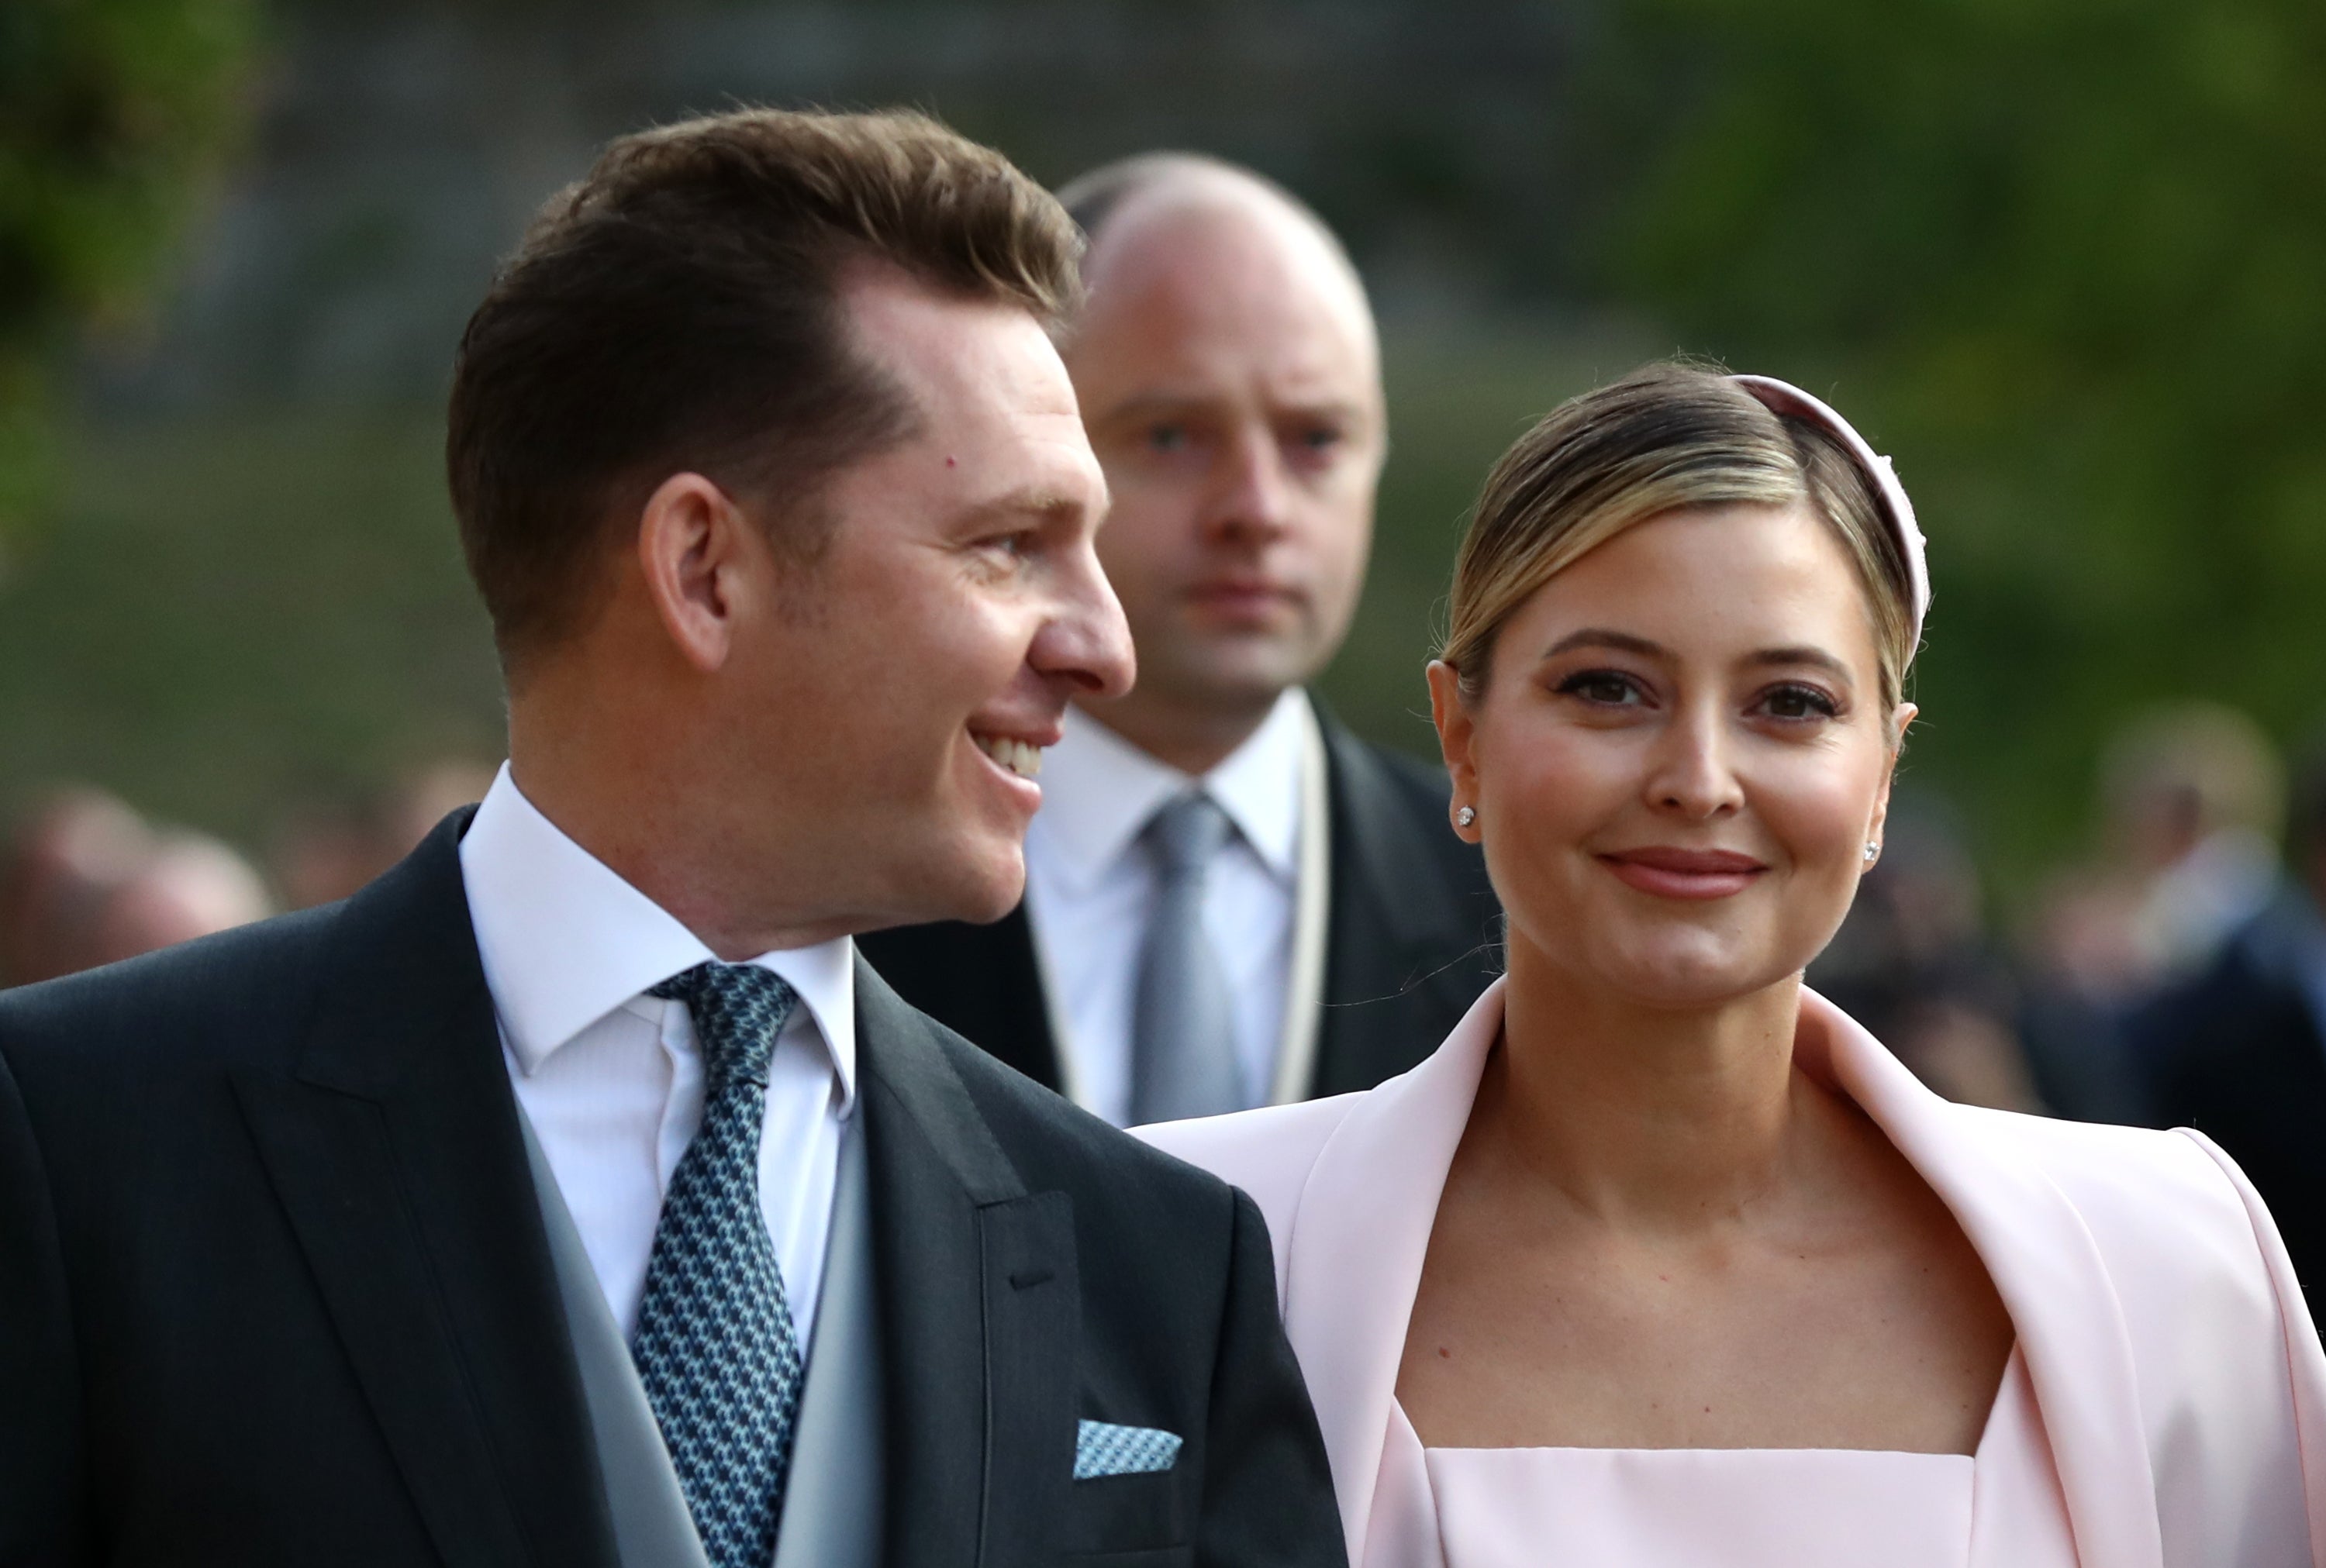 Nick Candy with wife Holly Valance at Princess Eugenie wedding in 2018